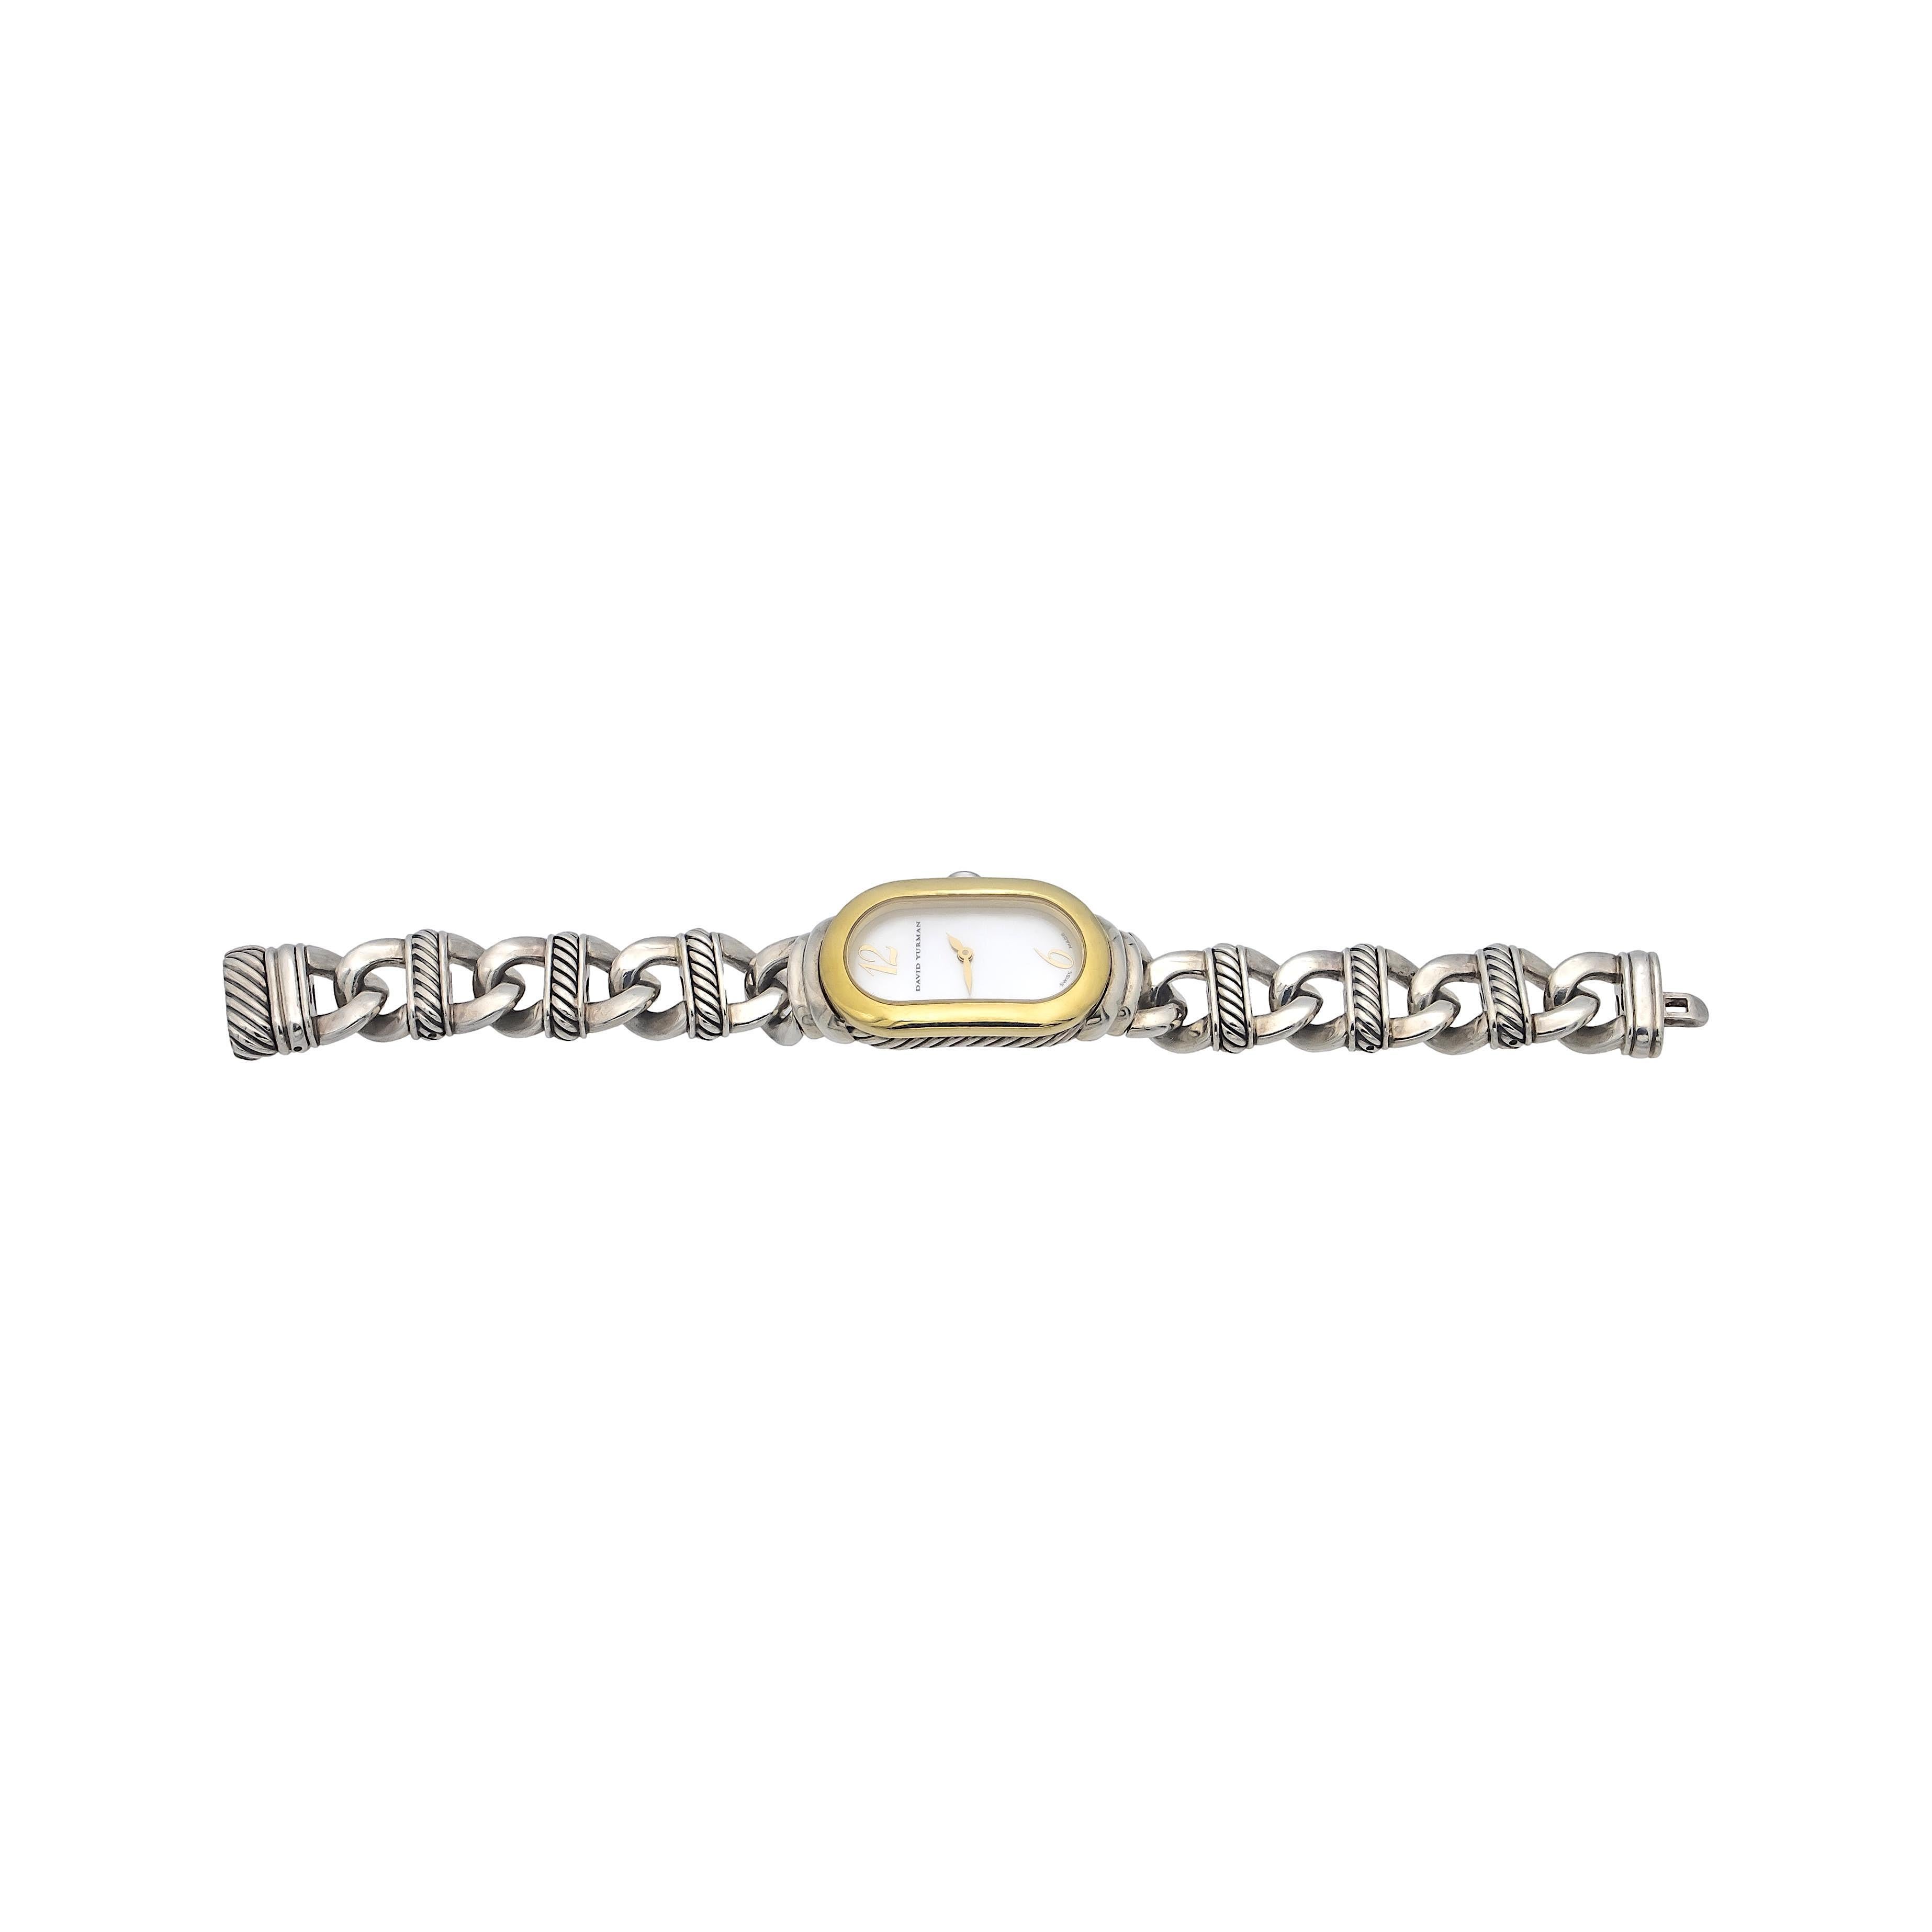 Contemporary David Yurman Sterling Silver 18K Yellow Gold Madison Oval Cable Bracelet Watch